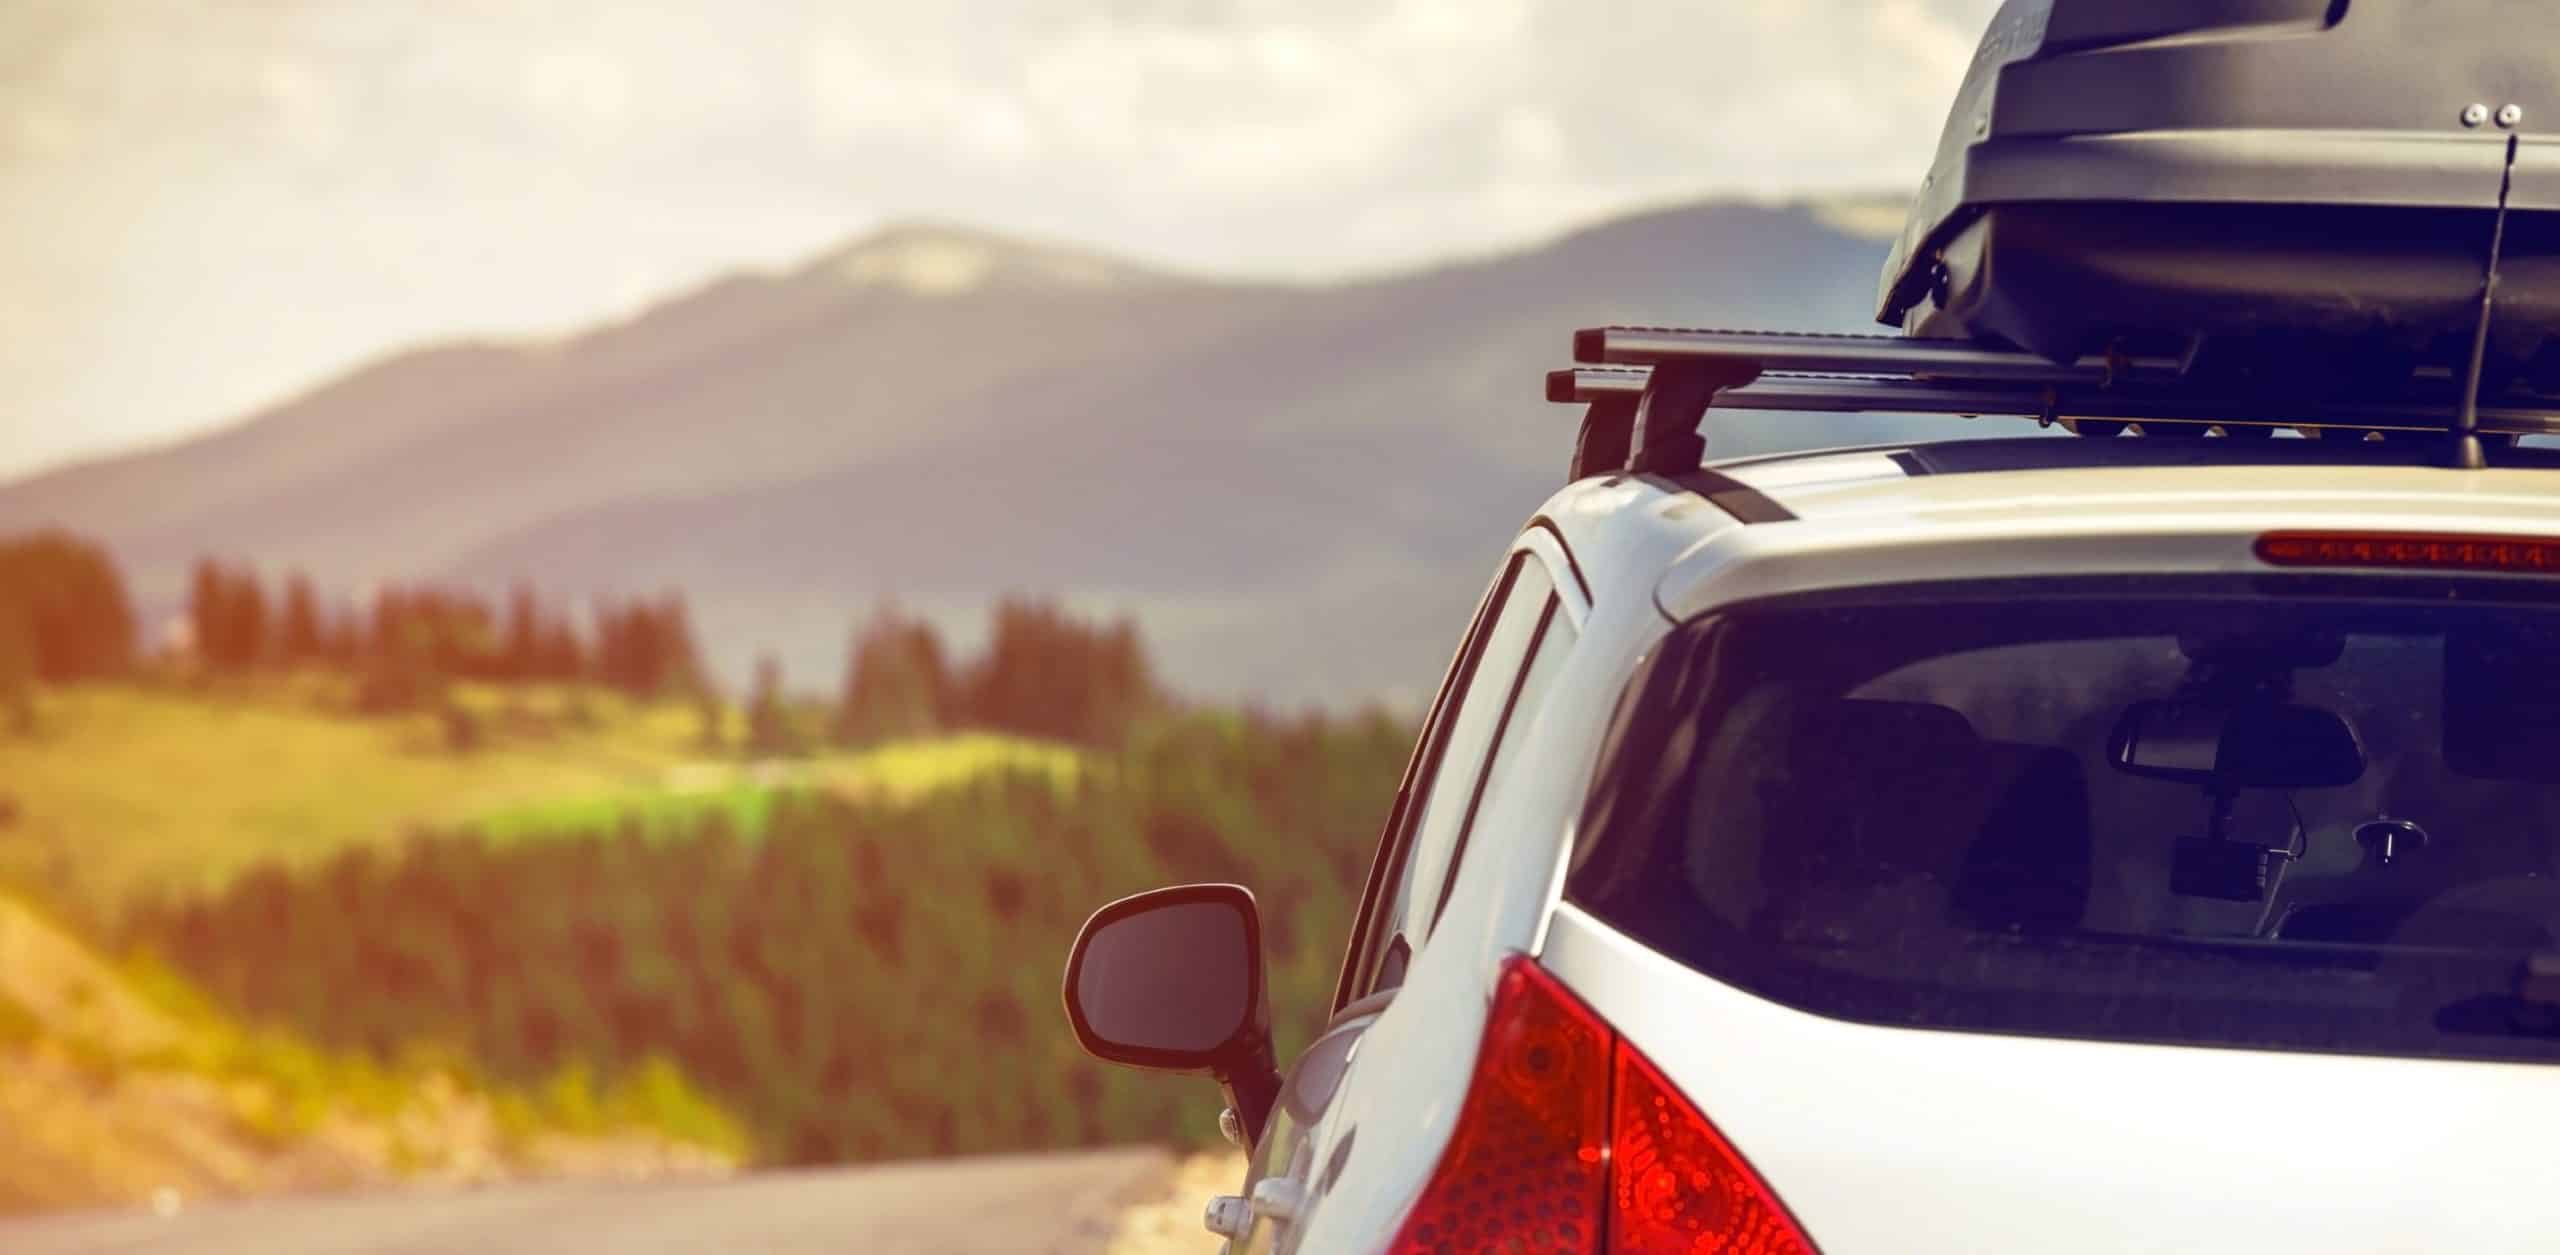 Car with Roof Rack - shutterstock_249498736